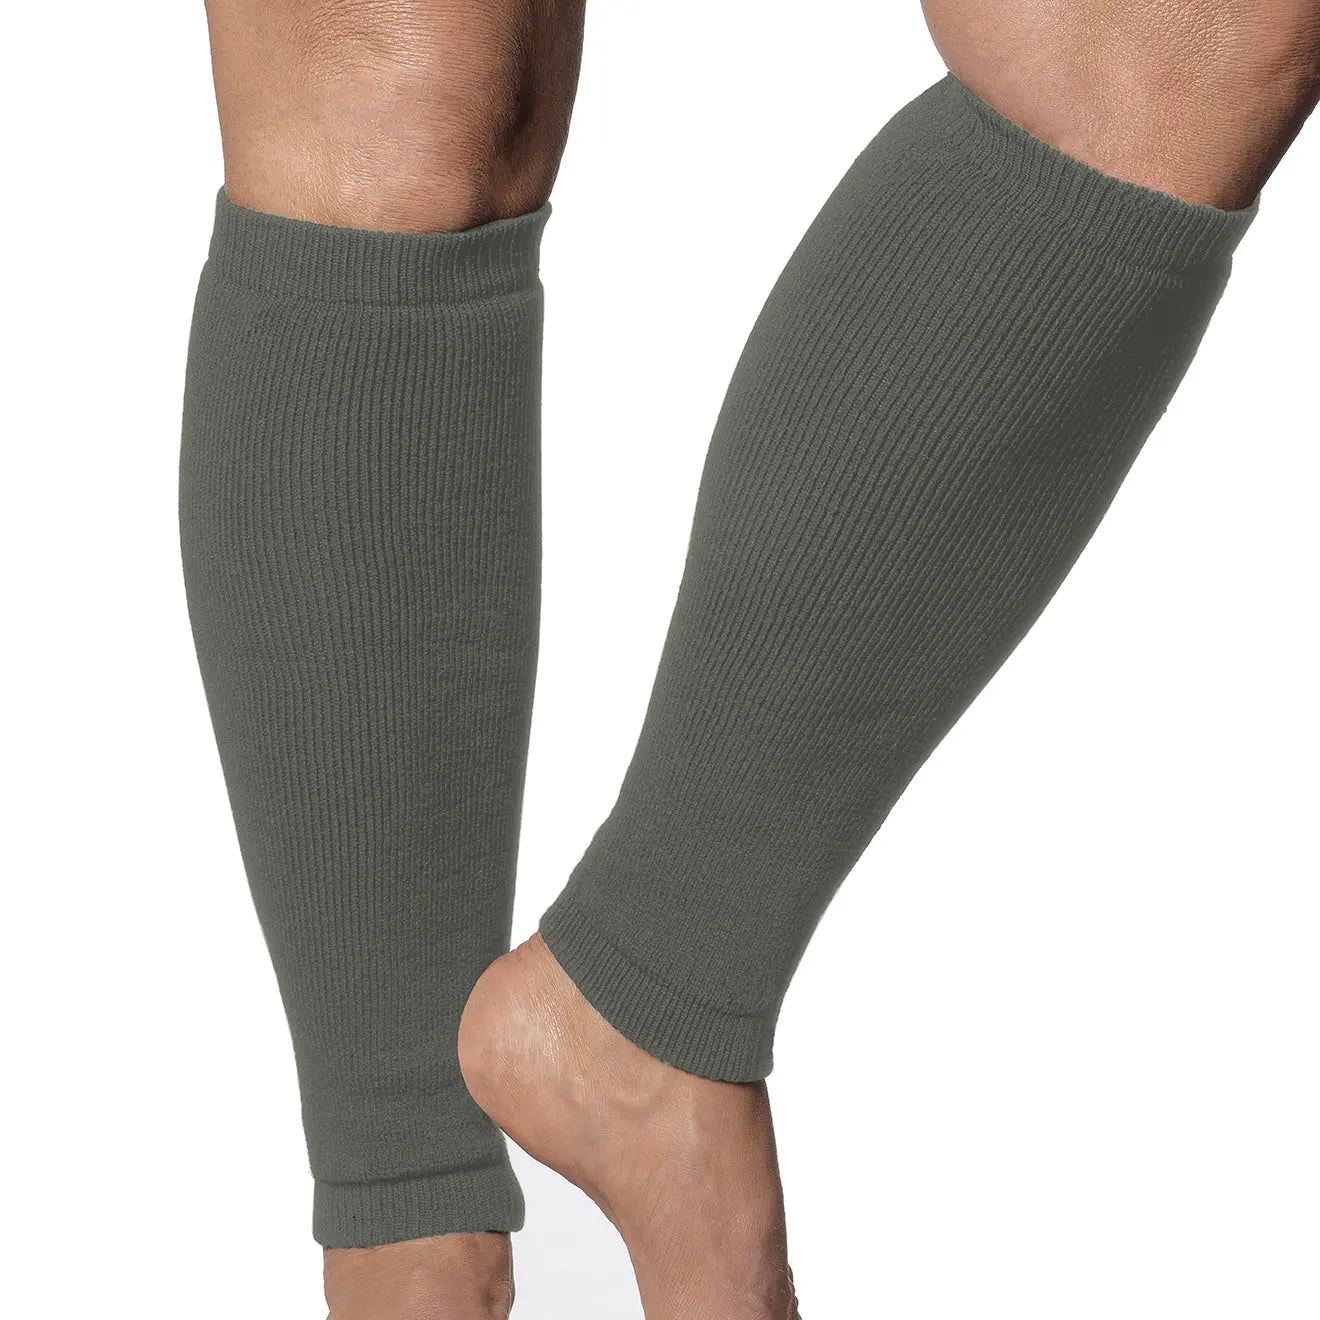 Leg Sleeves - Light Weight. Frail Skin Protectors. Olive